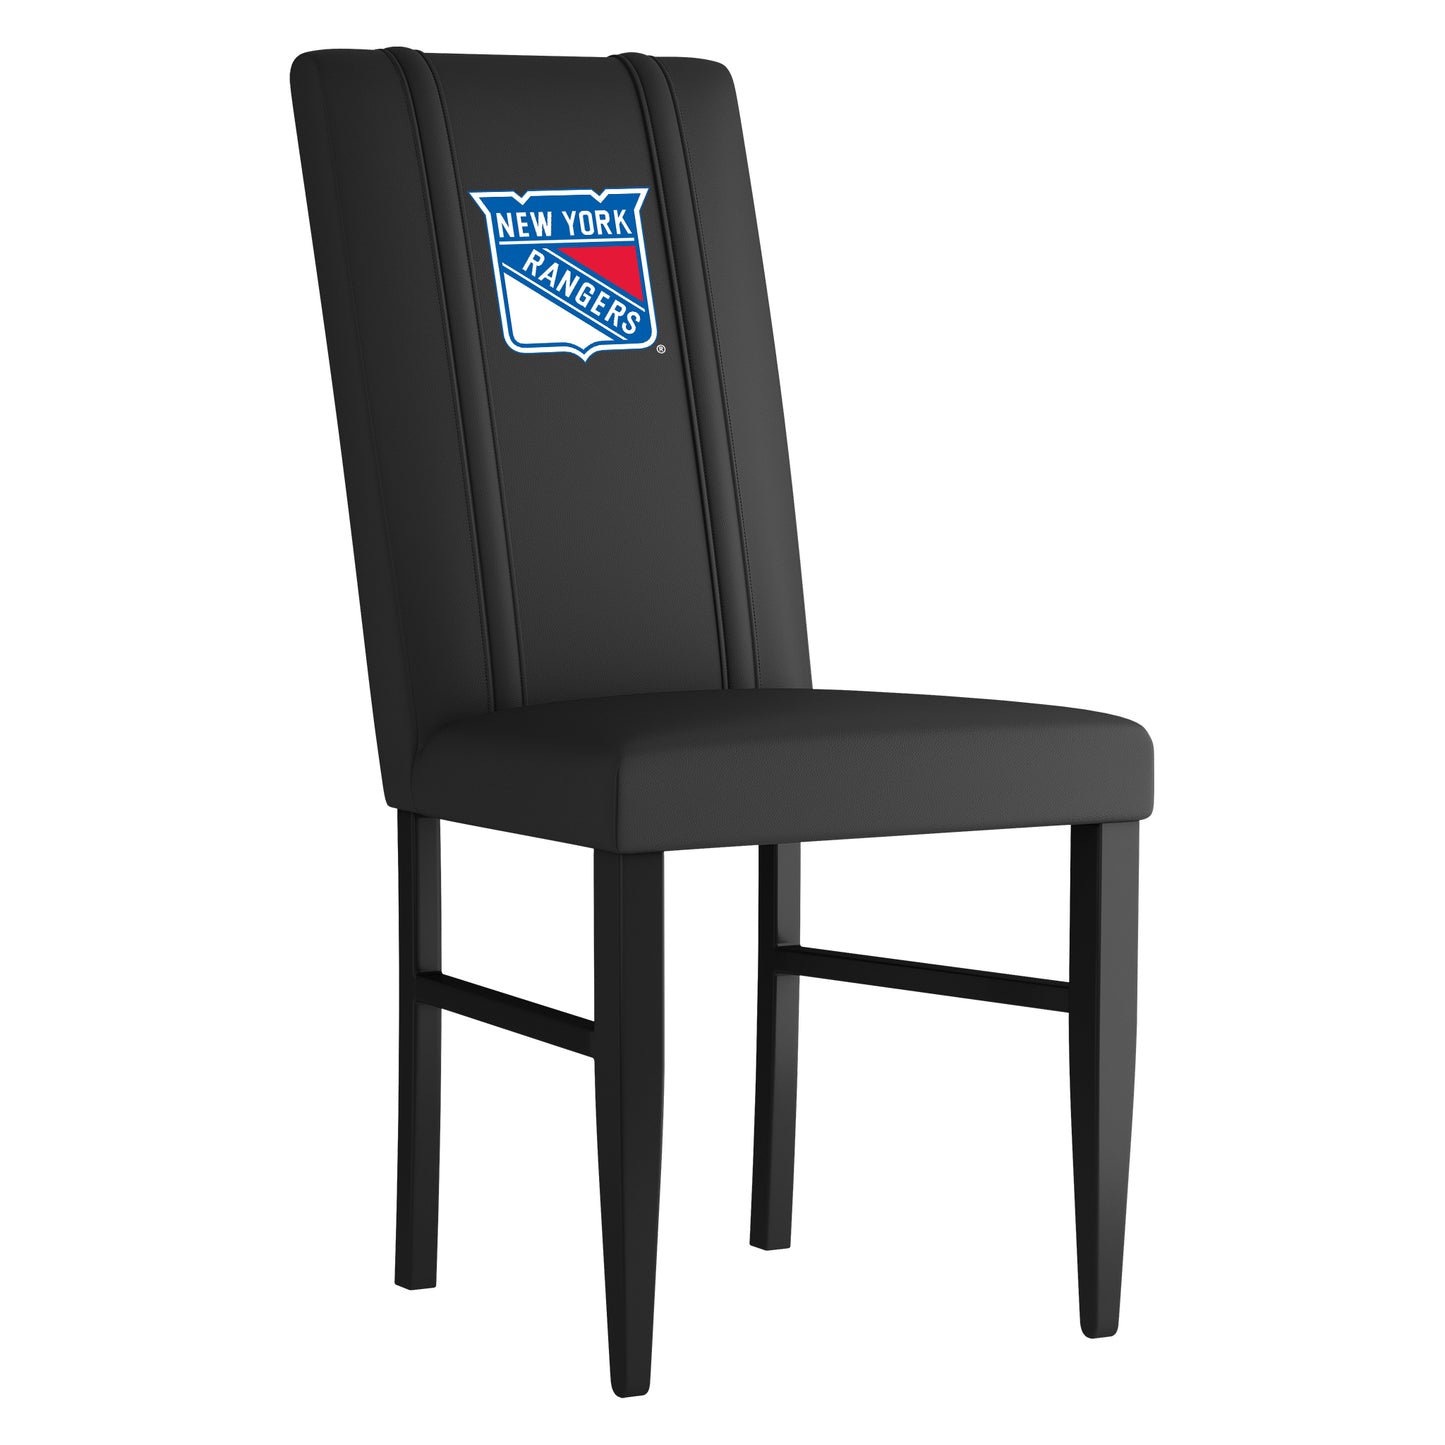 Side Chair 2000 with New York Rangers Logo Set of 2